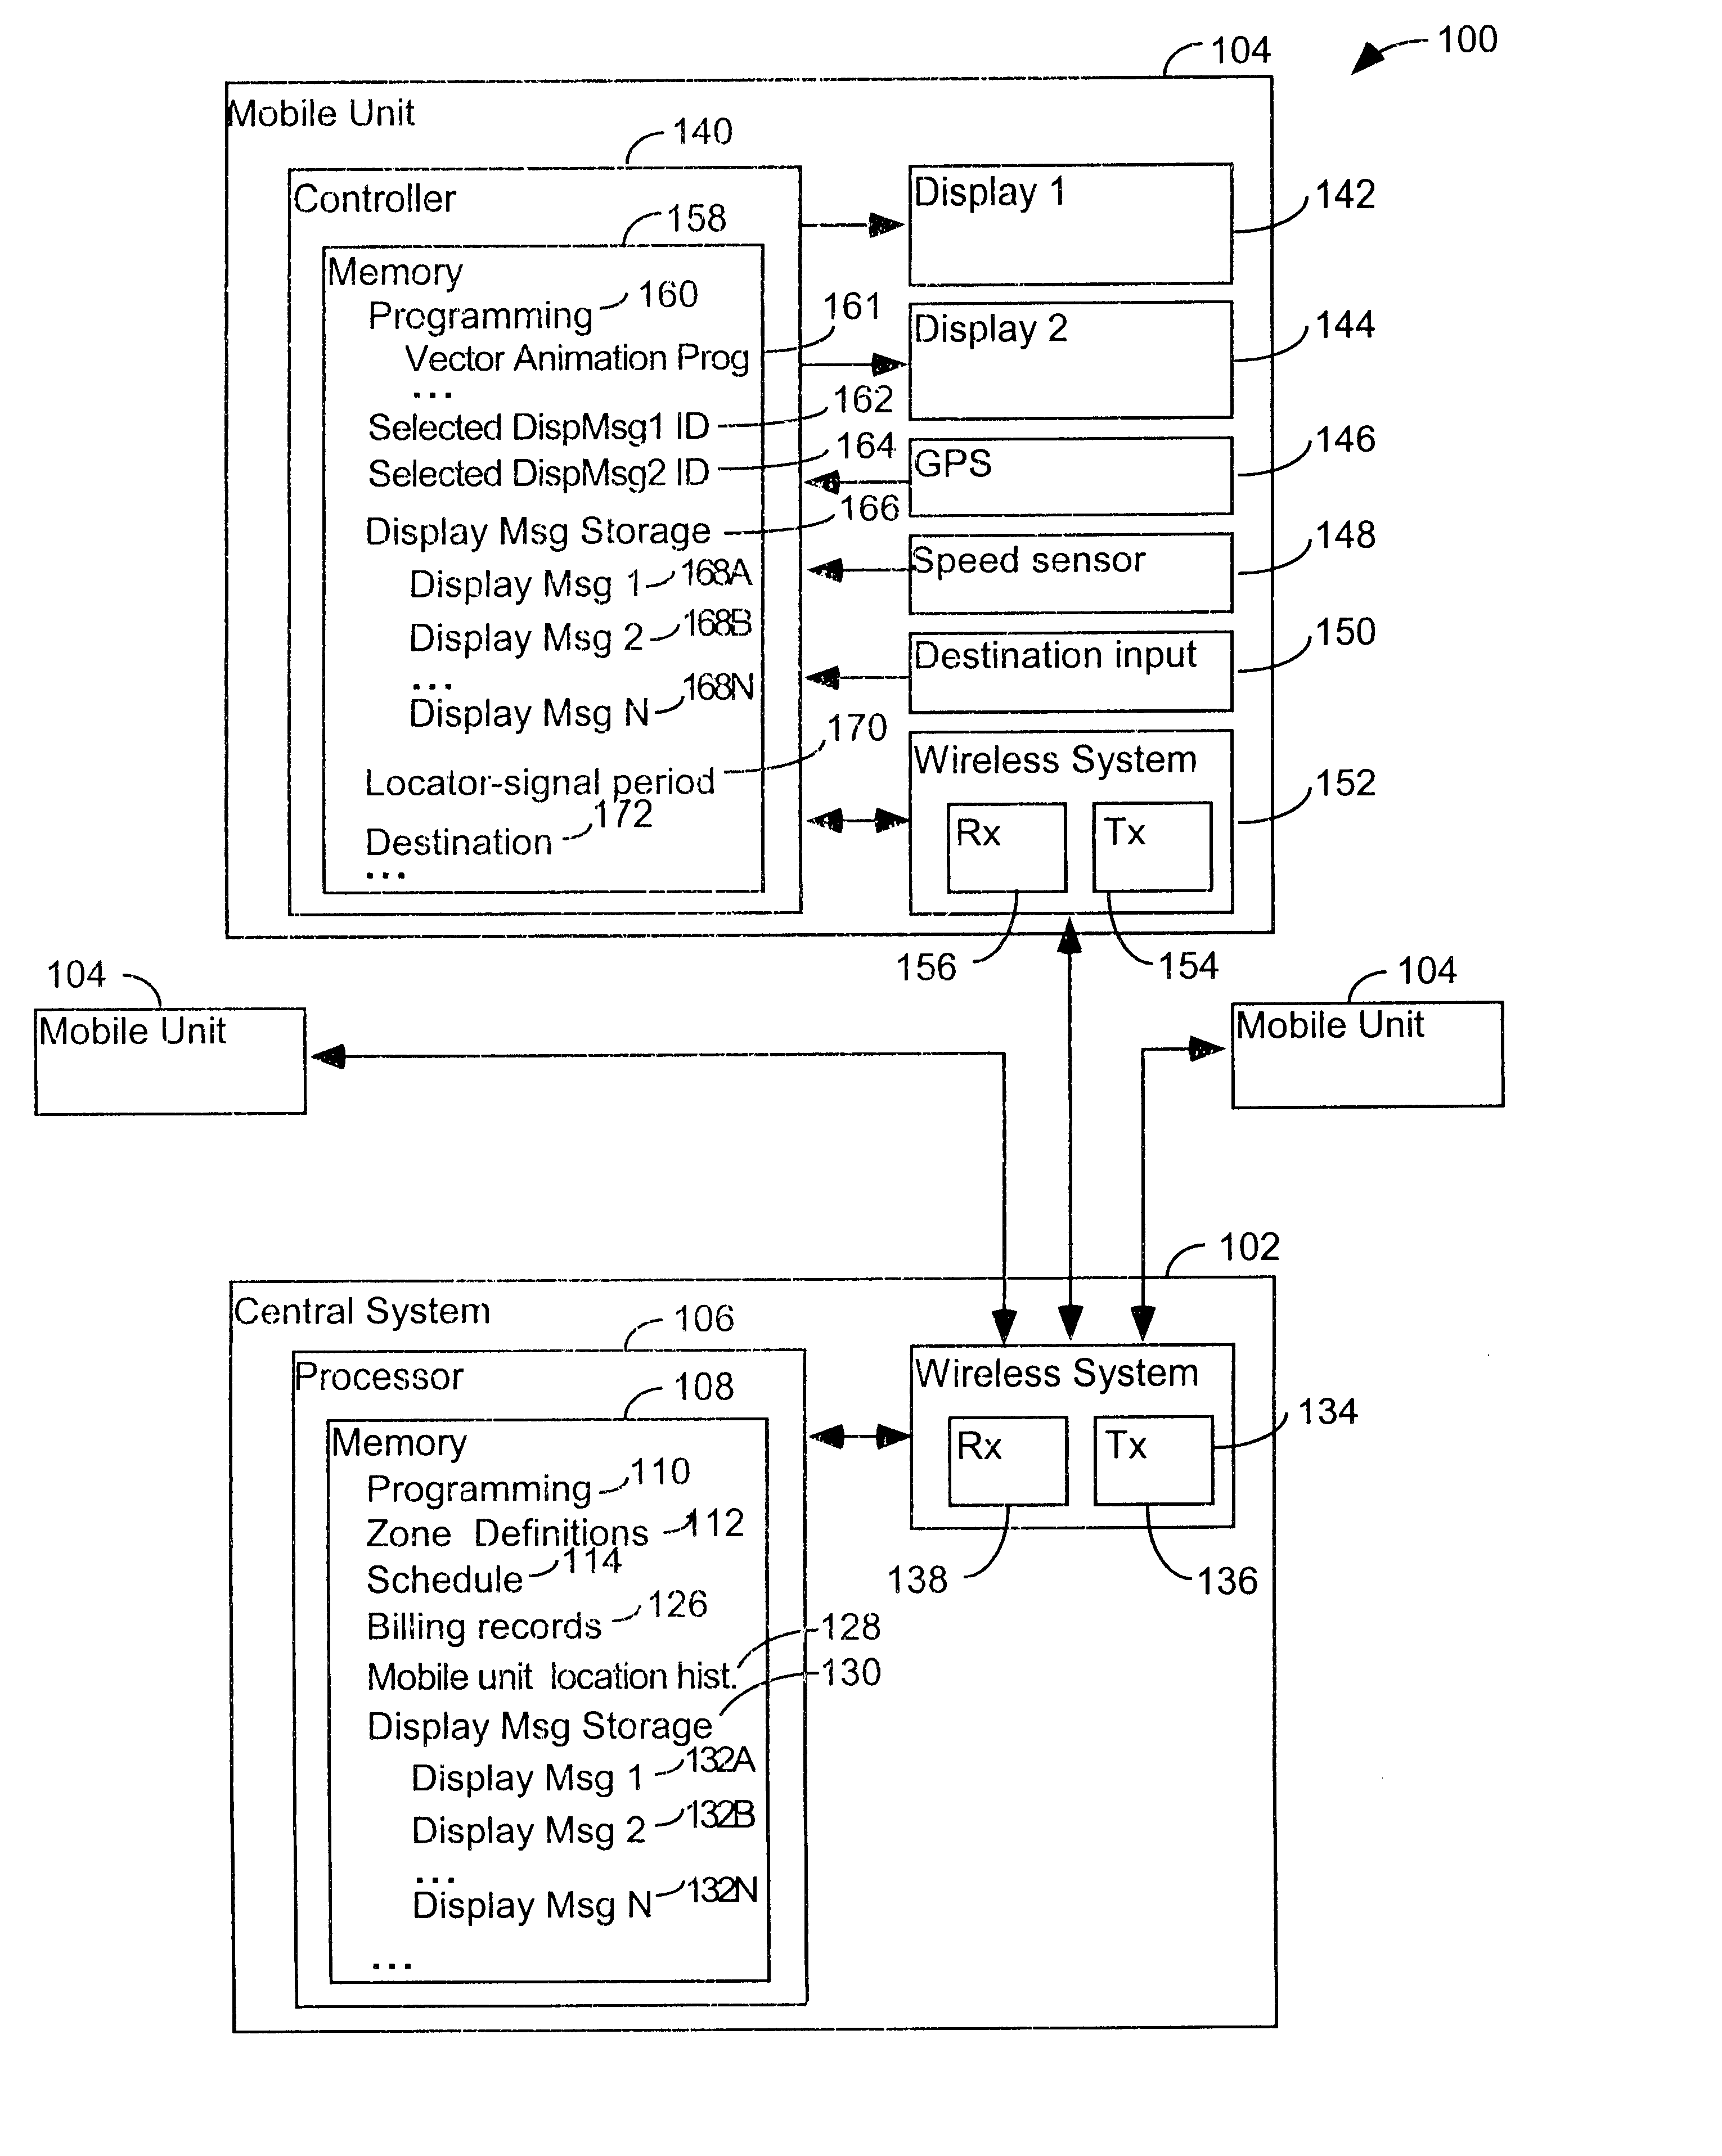 Apparatuses, methods, and computer programs for displaying information on vehicles